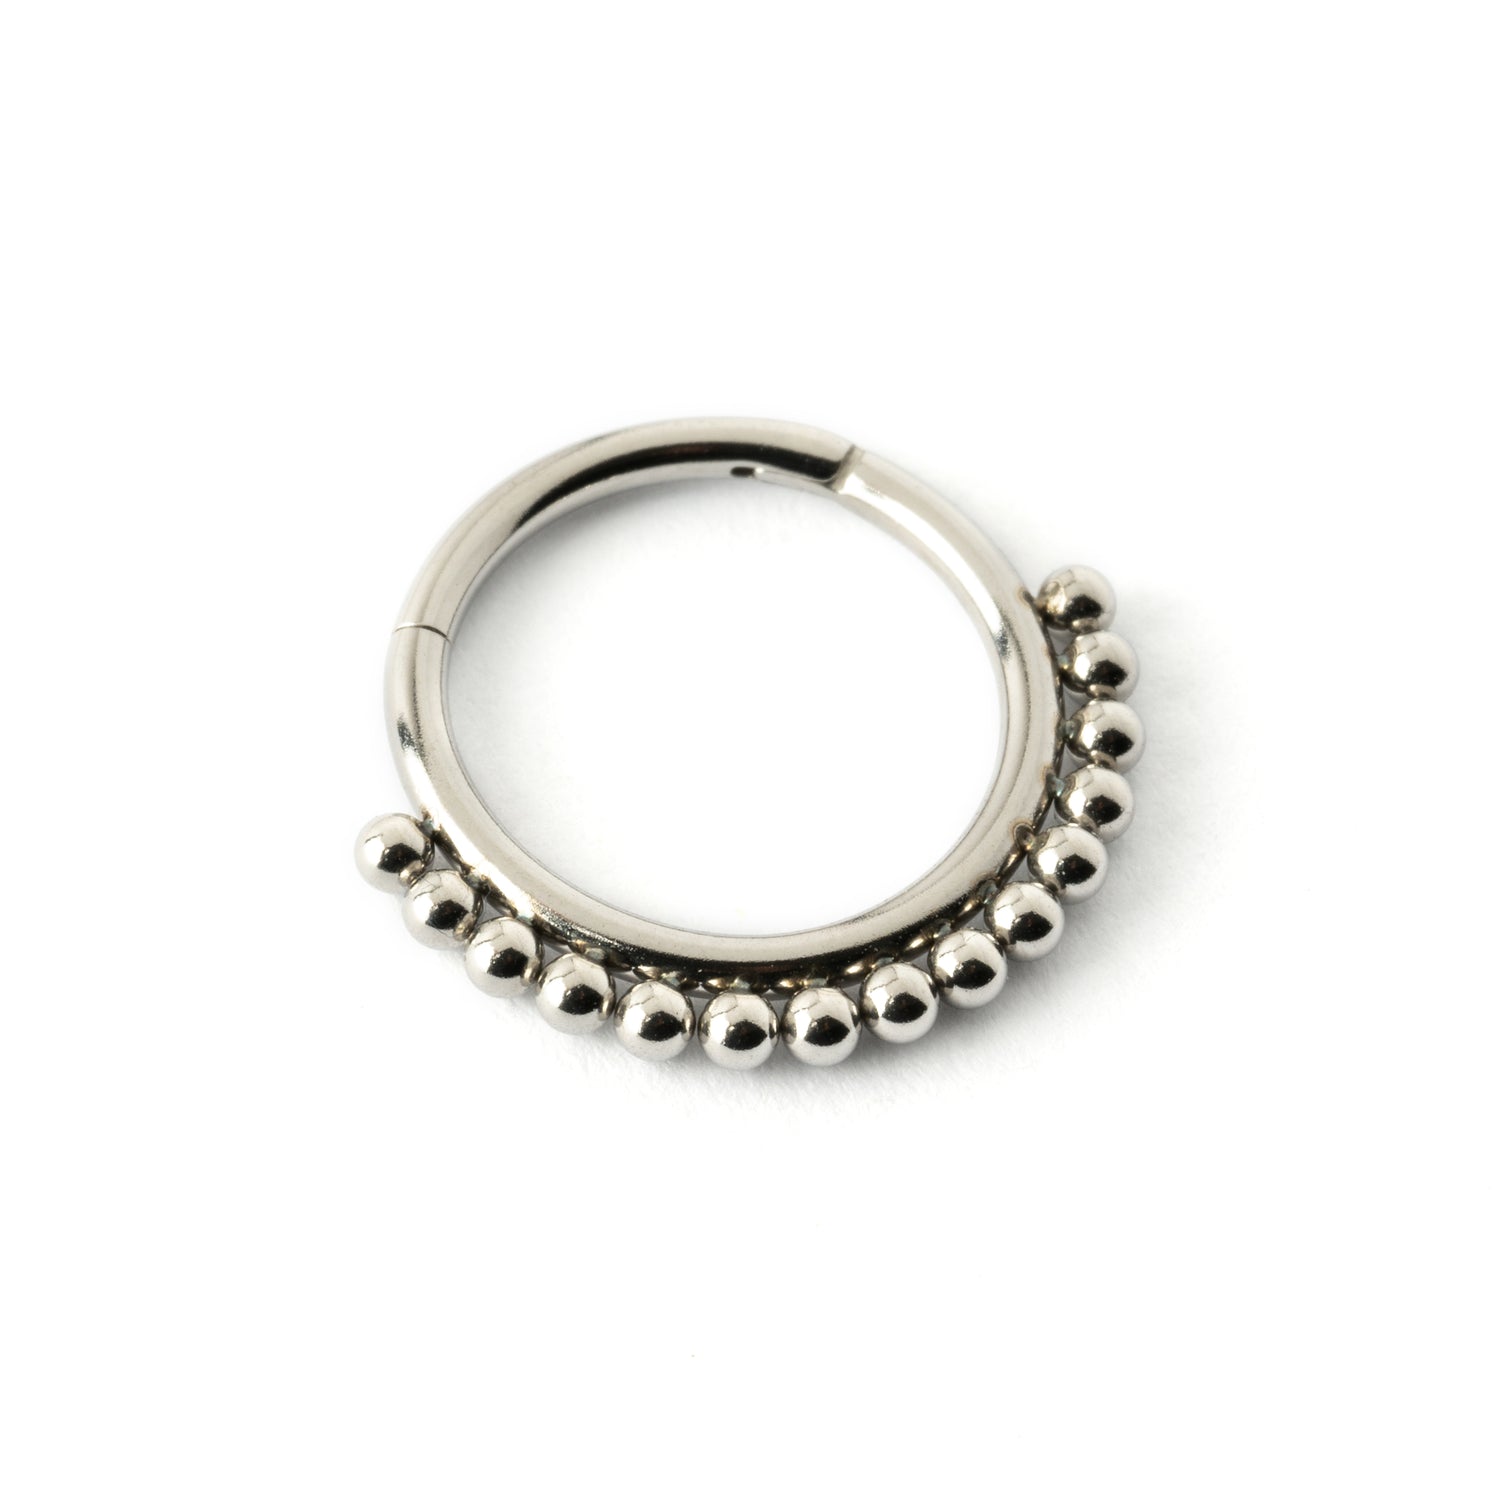 Liya surgical steel septum clicker ring left side view